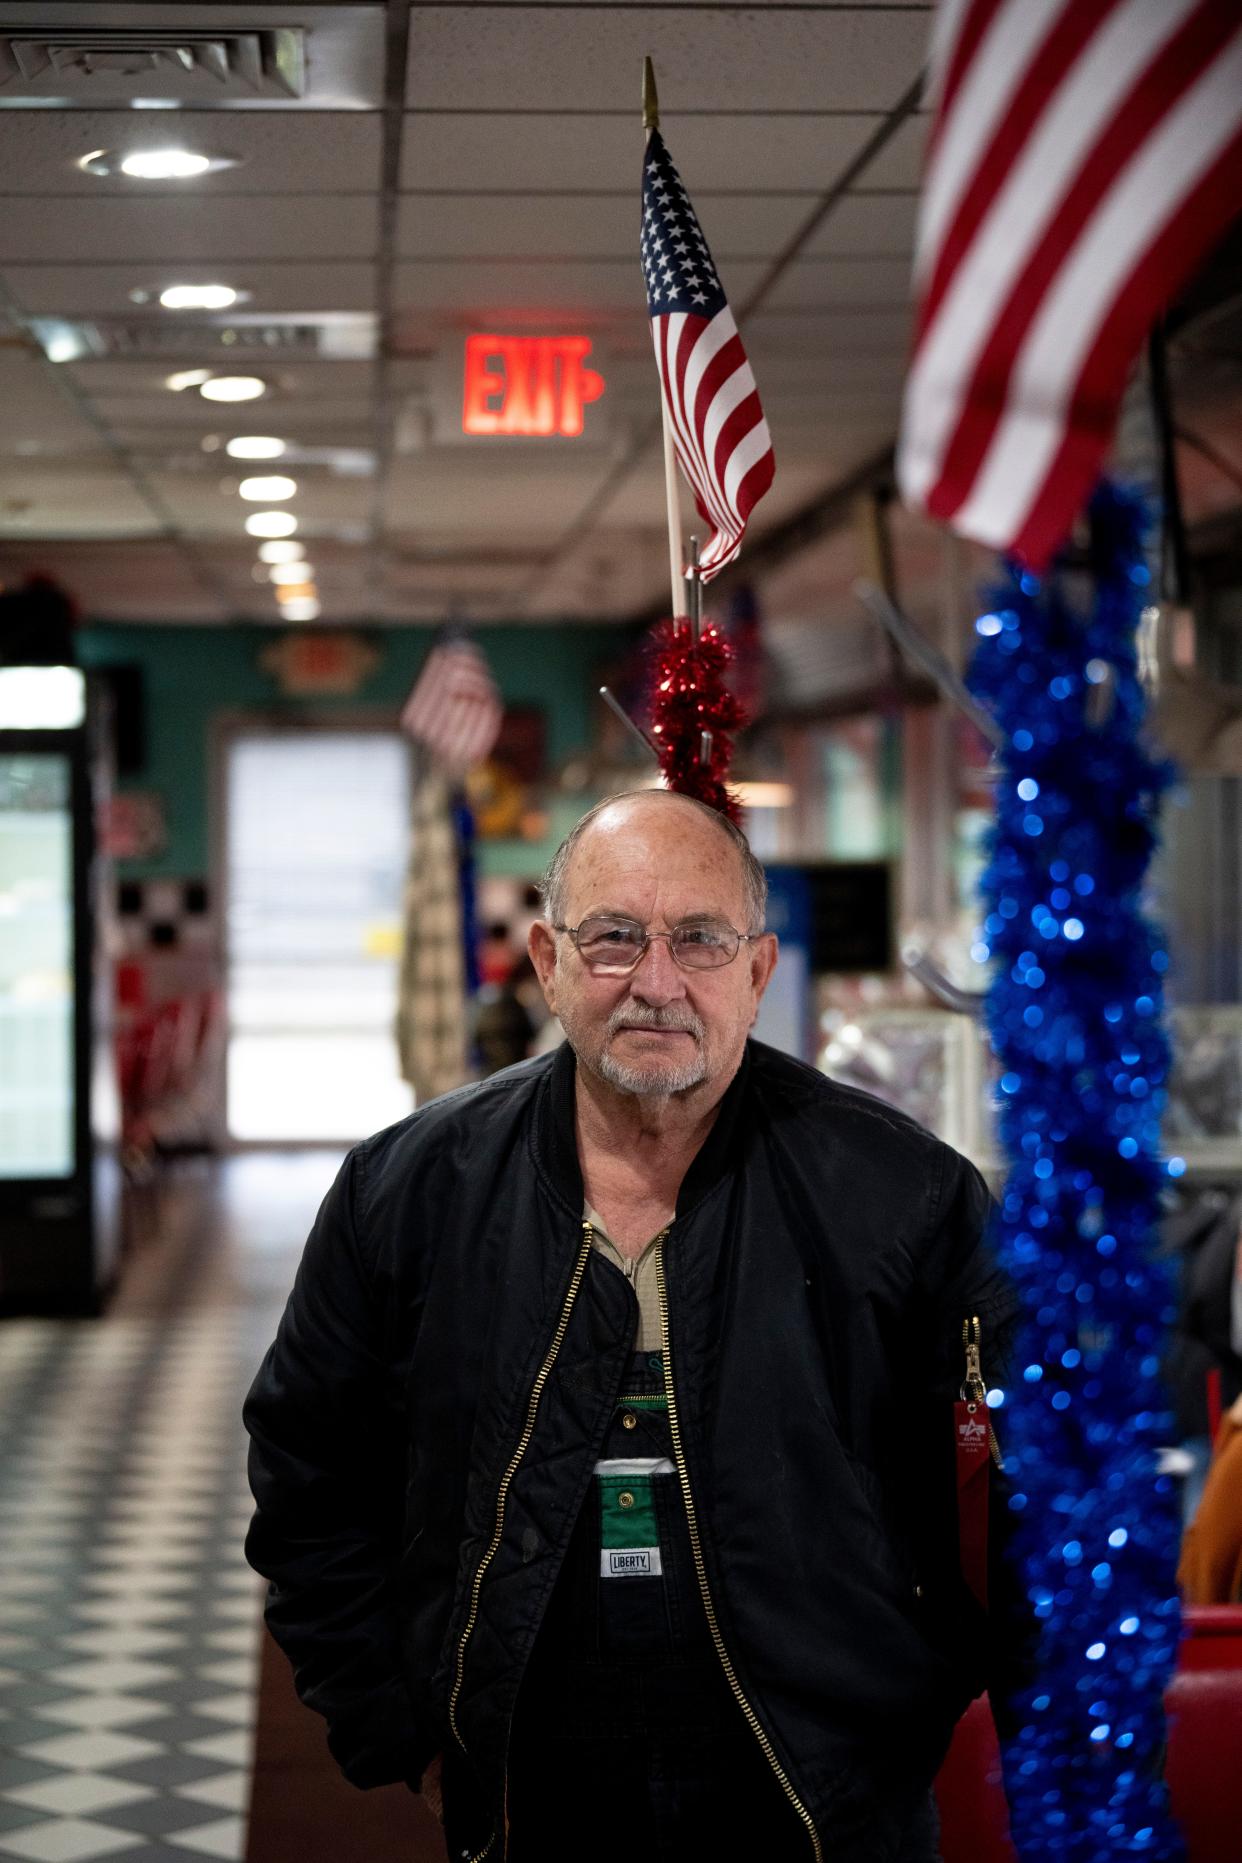 Dan Music, 74, of Highland County, stands at a diner in Seaman.